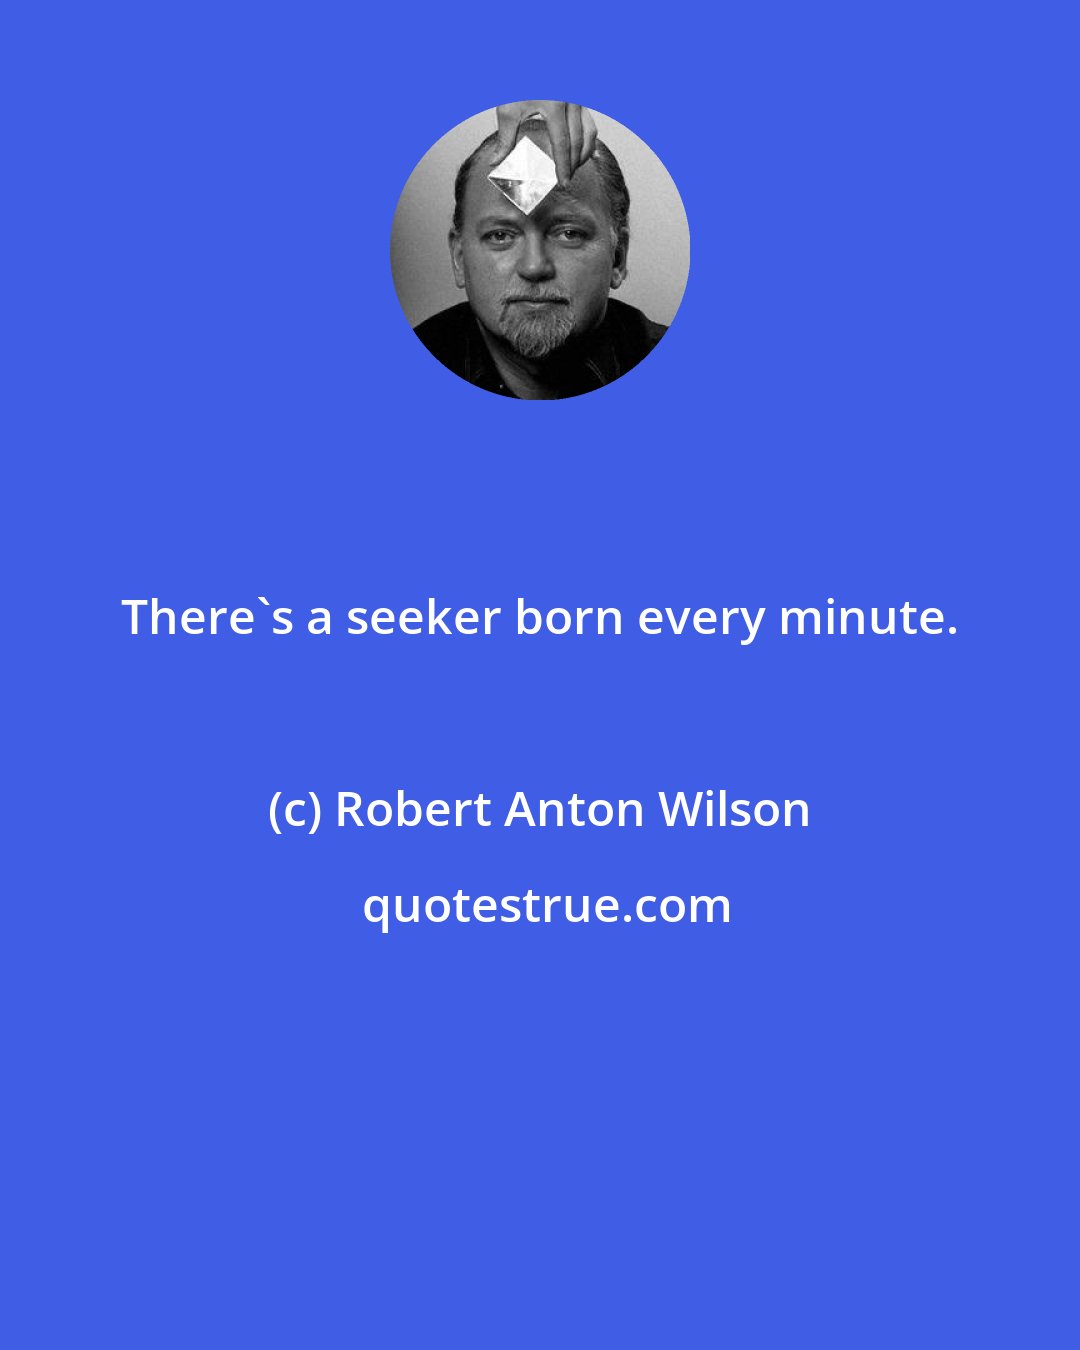 Robert Anton Wilson: There's a seeker born every minute.